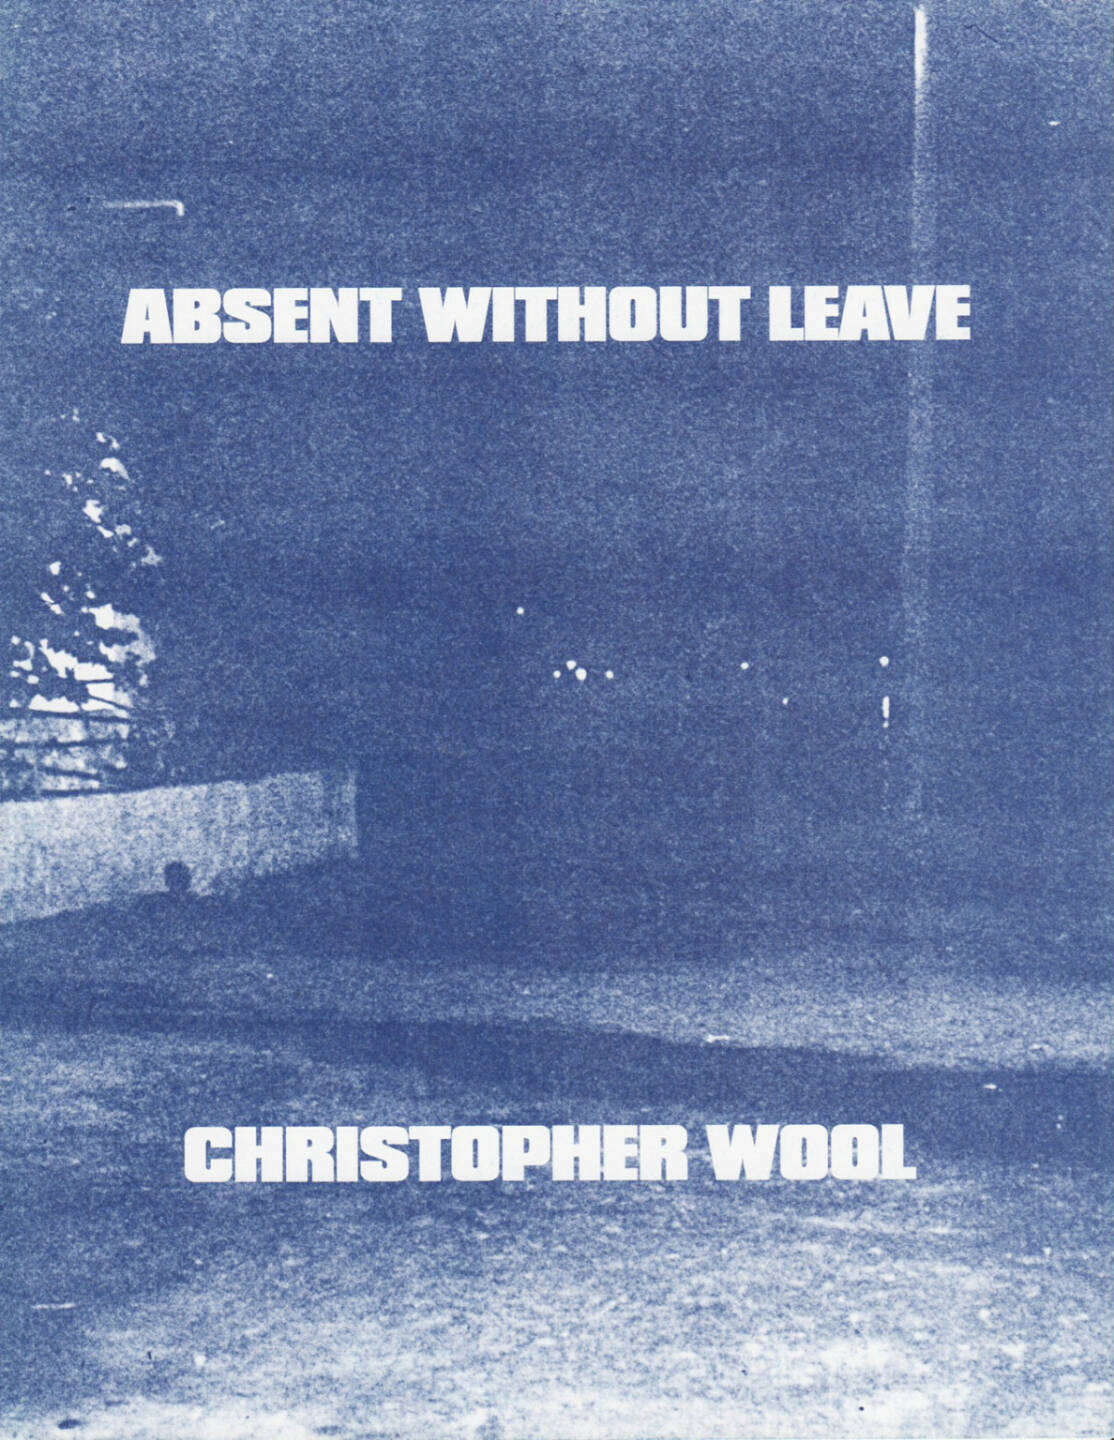 Christopher Wool - Absent Without Leave, 180-300 Euro, http://josefchladek.com/book/christopher_wool_-_absent_without_leave